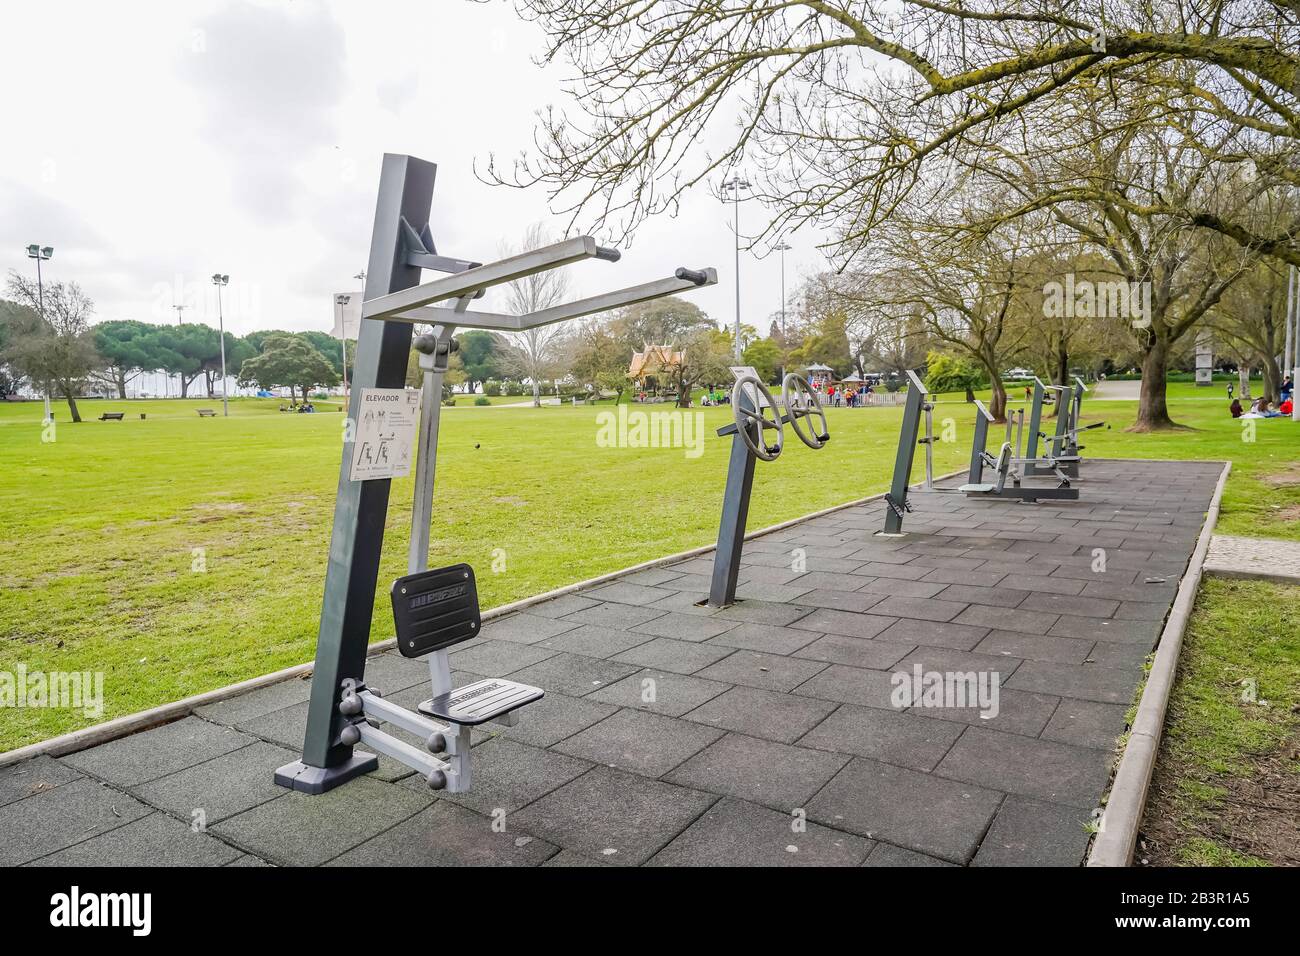 outdoor workout and exercise equipments in belem lisbon portugal europe Stock Photo